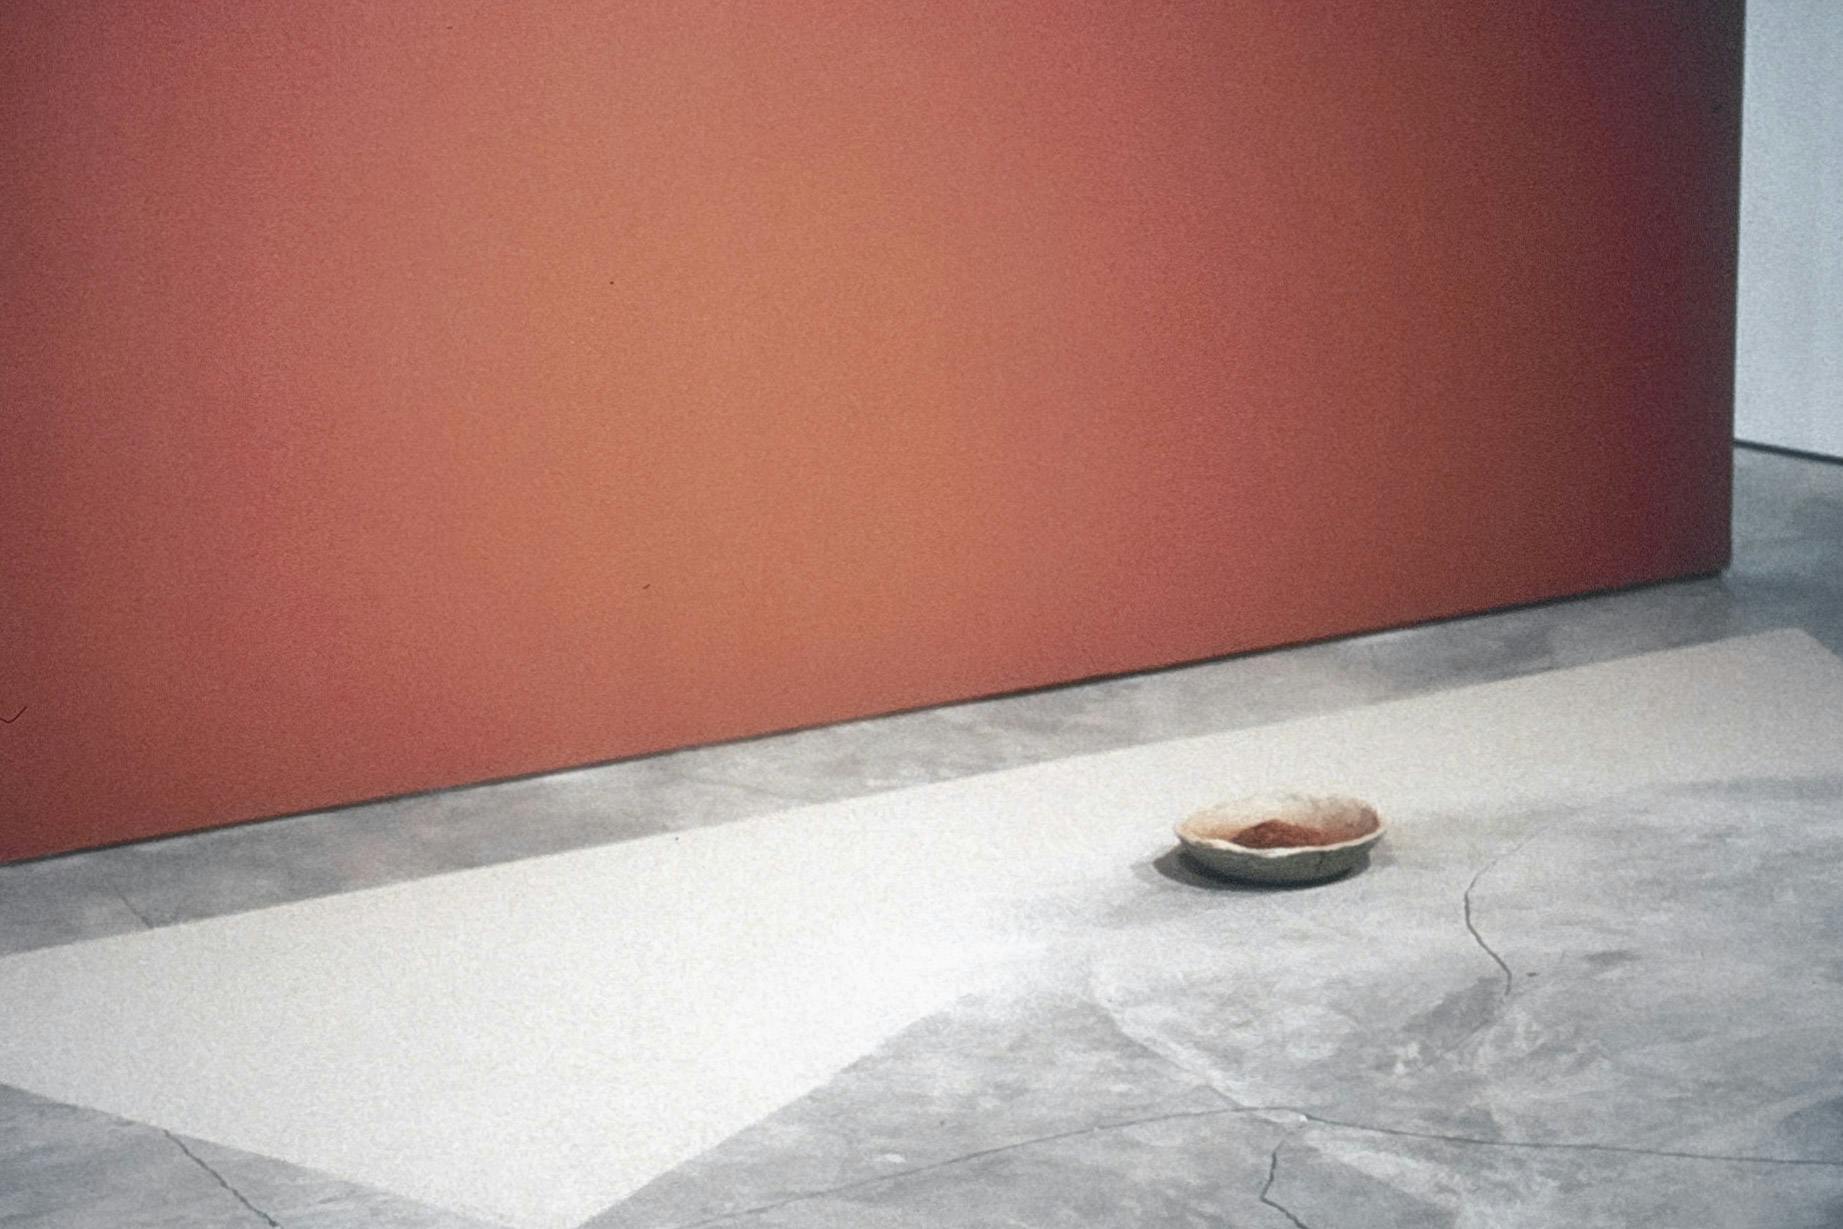 A closeup of the base of a wall in a gallery. The wall is painted clay-red, and has a flat handmade dish resting on the floor in front of it. The dish contains a mound of powder that matches the wall.